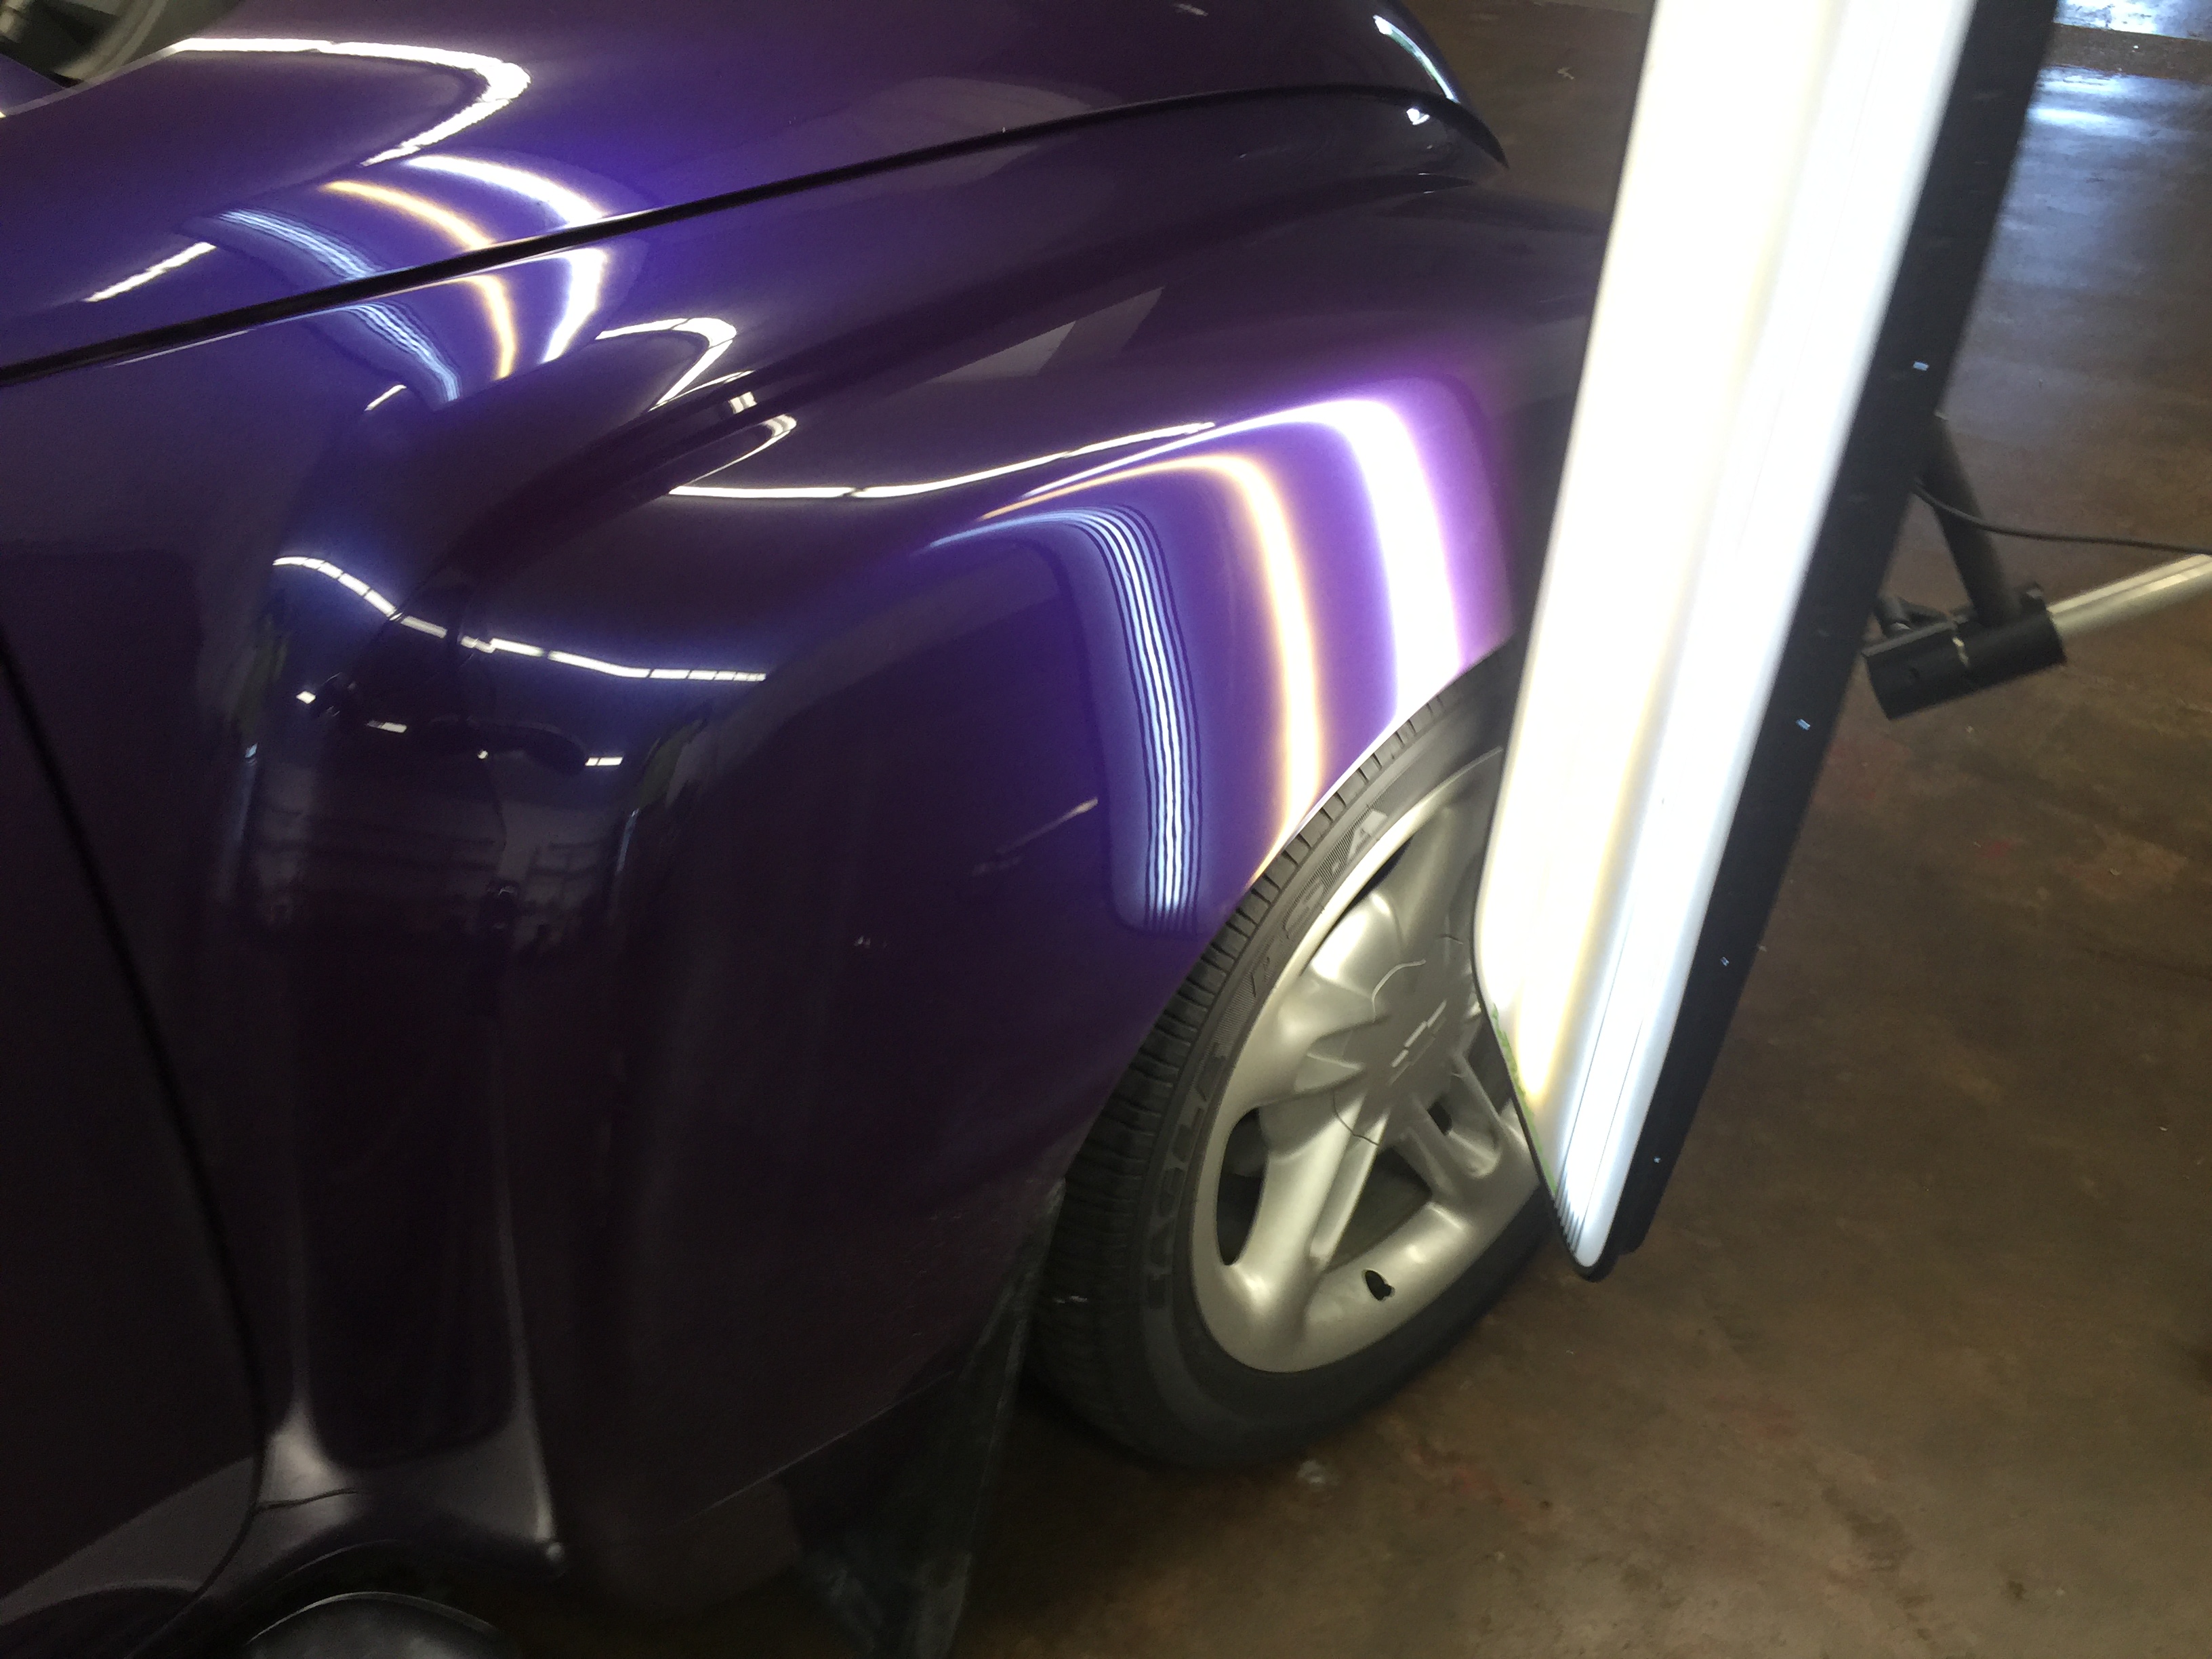 2004 Chevy SSR, Paintless Dent Removal on the passenger fender, removed by Michael Bocek out of Springfield, IL http://217dent.com